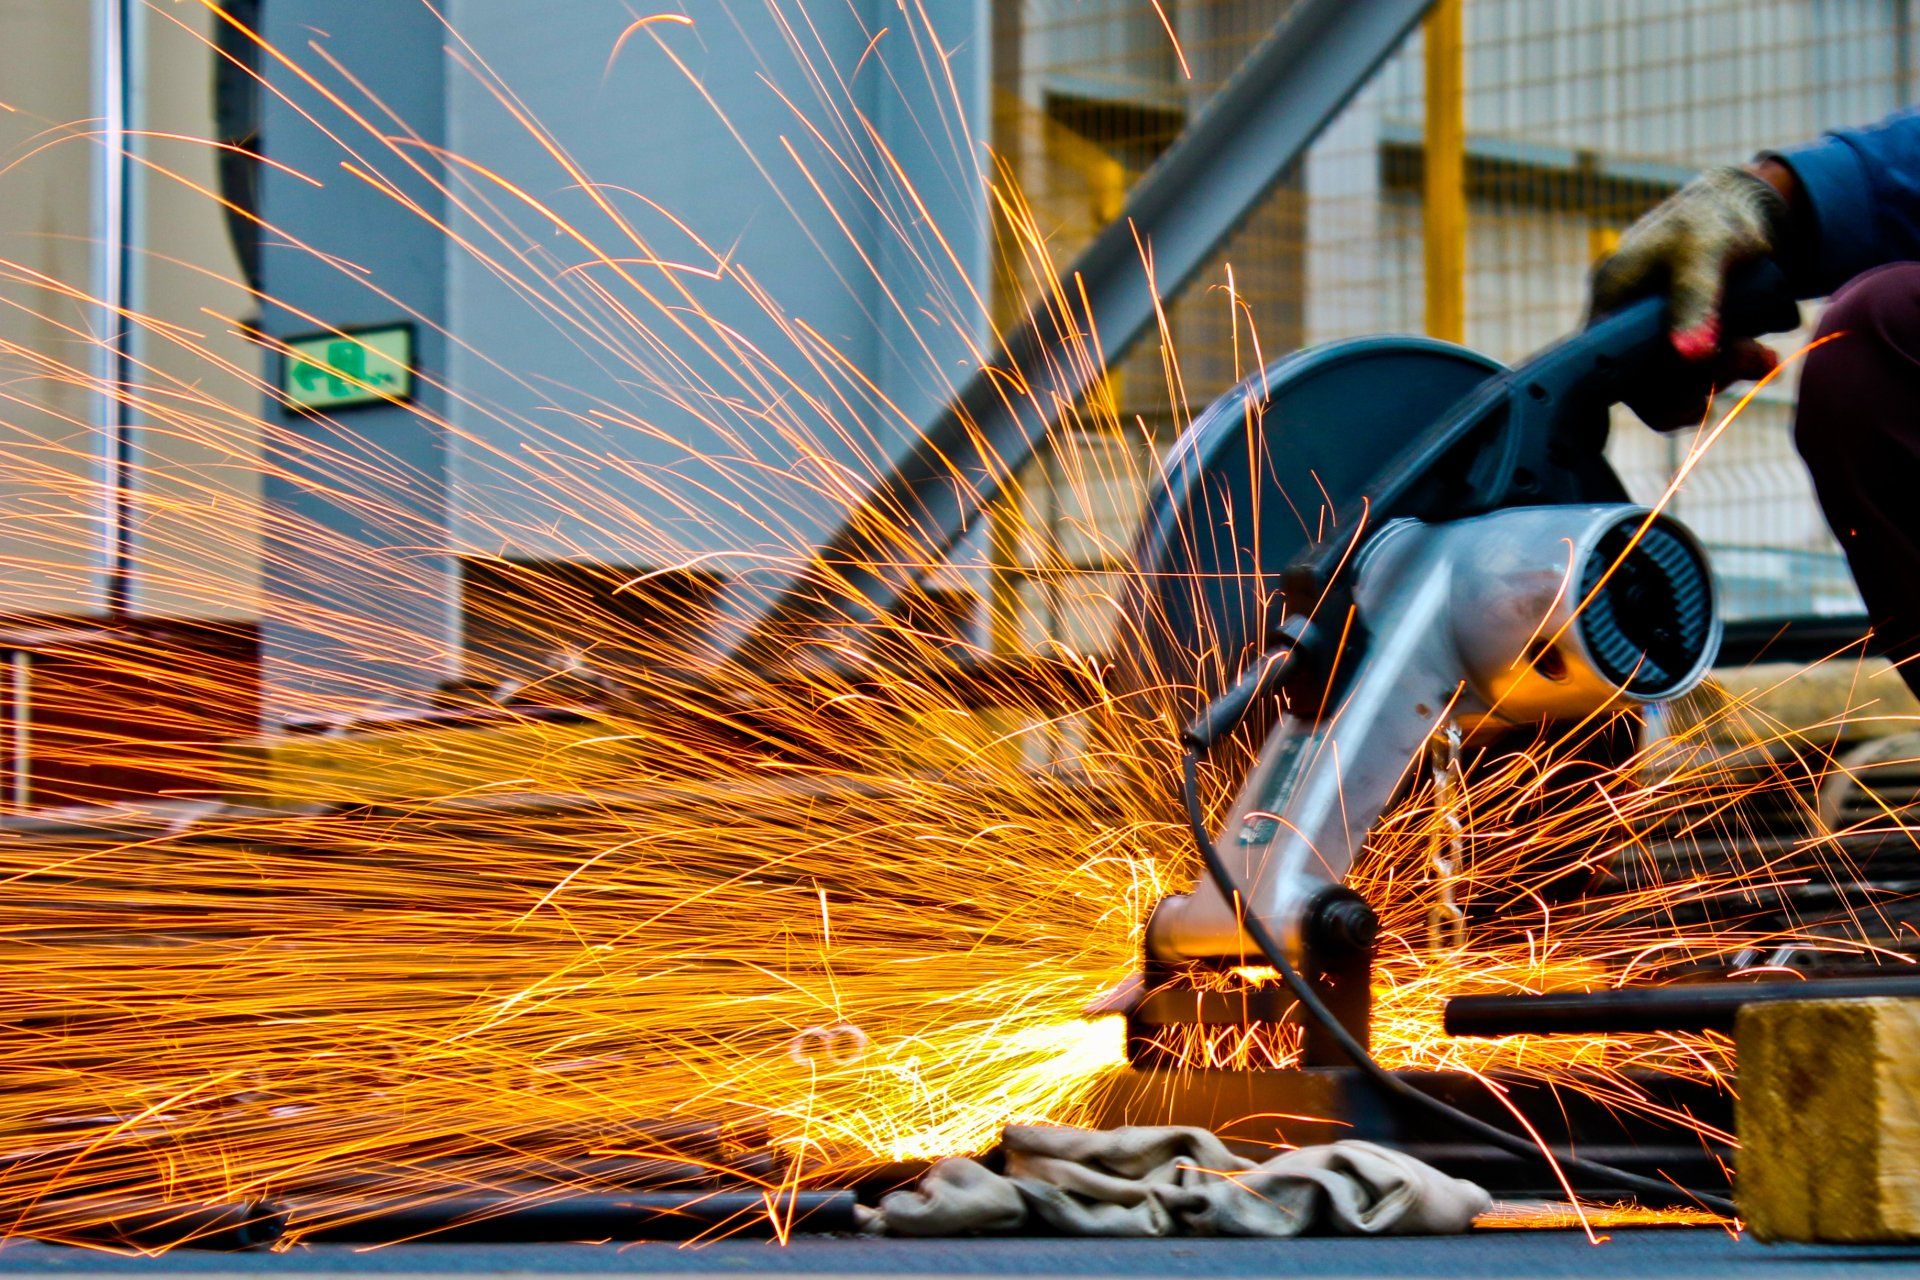 A construction site in which a grinder is being used and sparks are flying